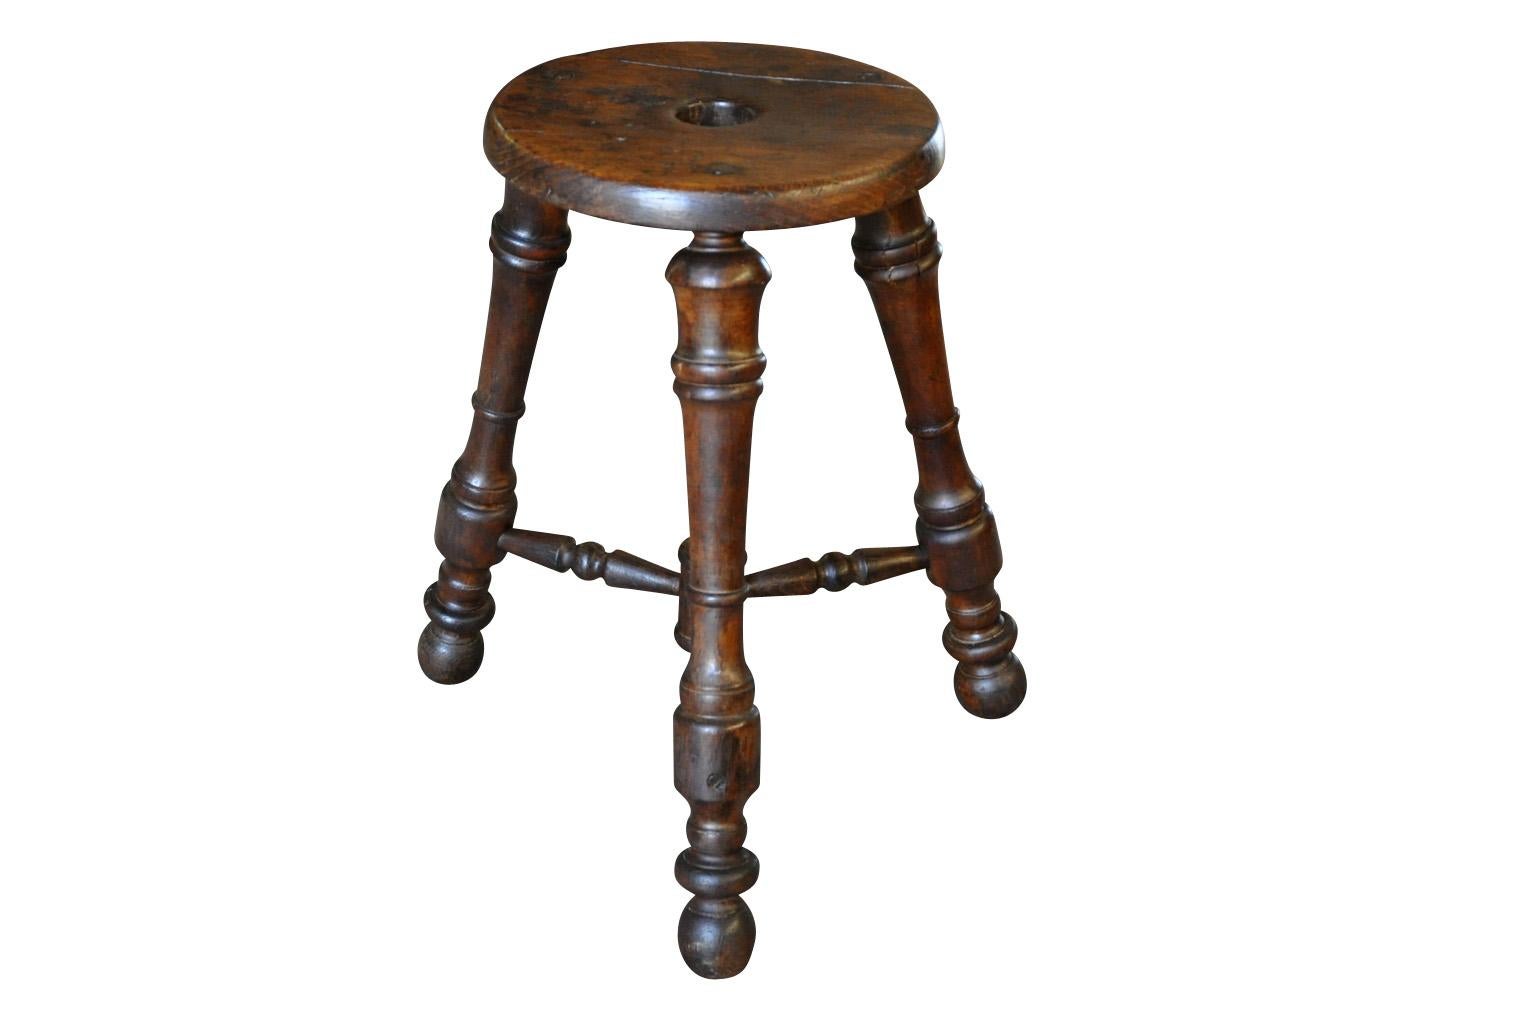 A very handsome French later 19th century stool in richly stained oak. A wonderful accent piece for any casually elegant surrounding.